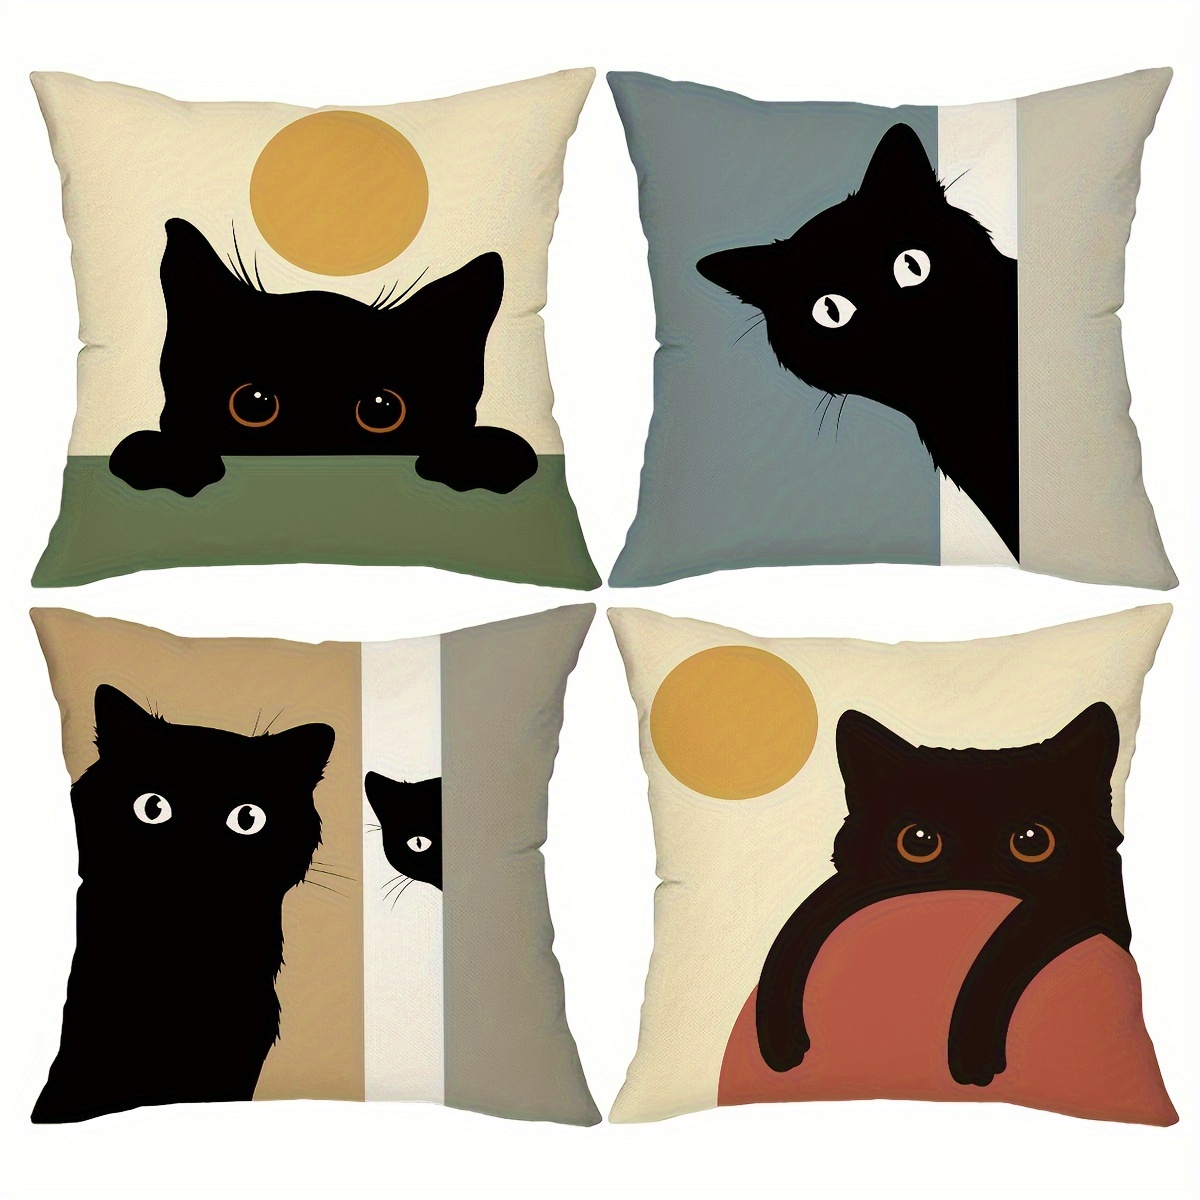 

4-pack Contemporary Cat Cartoon Decorative Throw Pillow Covers, Linen Blend Zippered Square Cushion Cases, Machine Washable, For Sofa Couch Bed Car, 18x18 Inch - Various Room Types